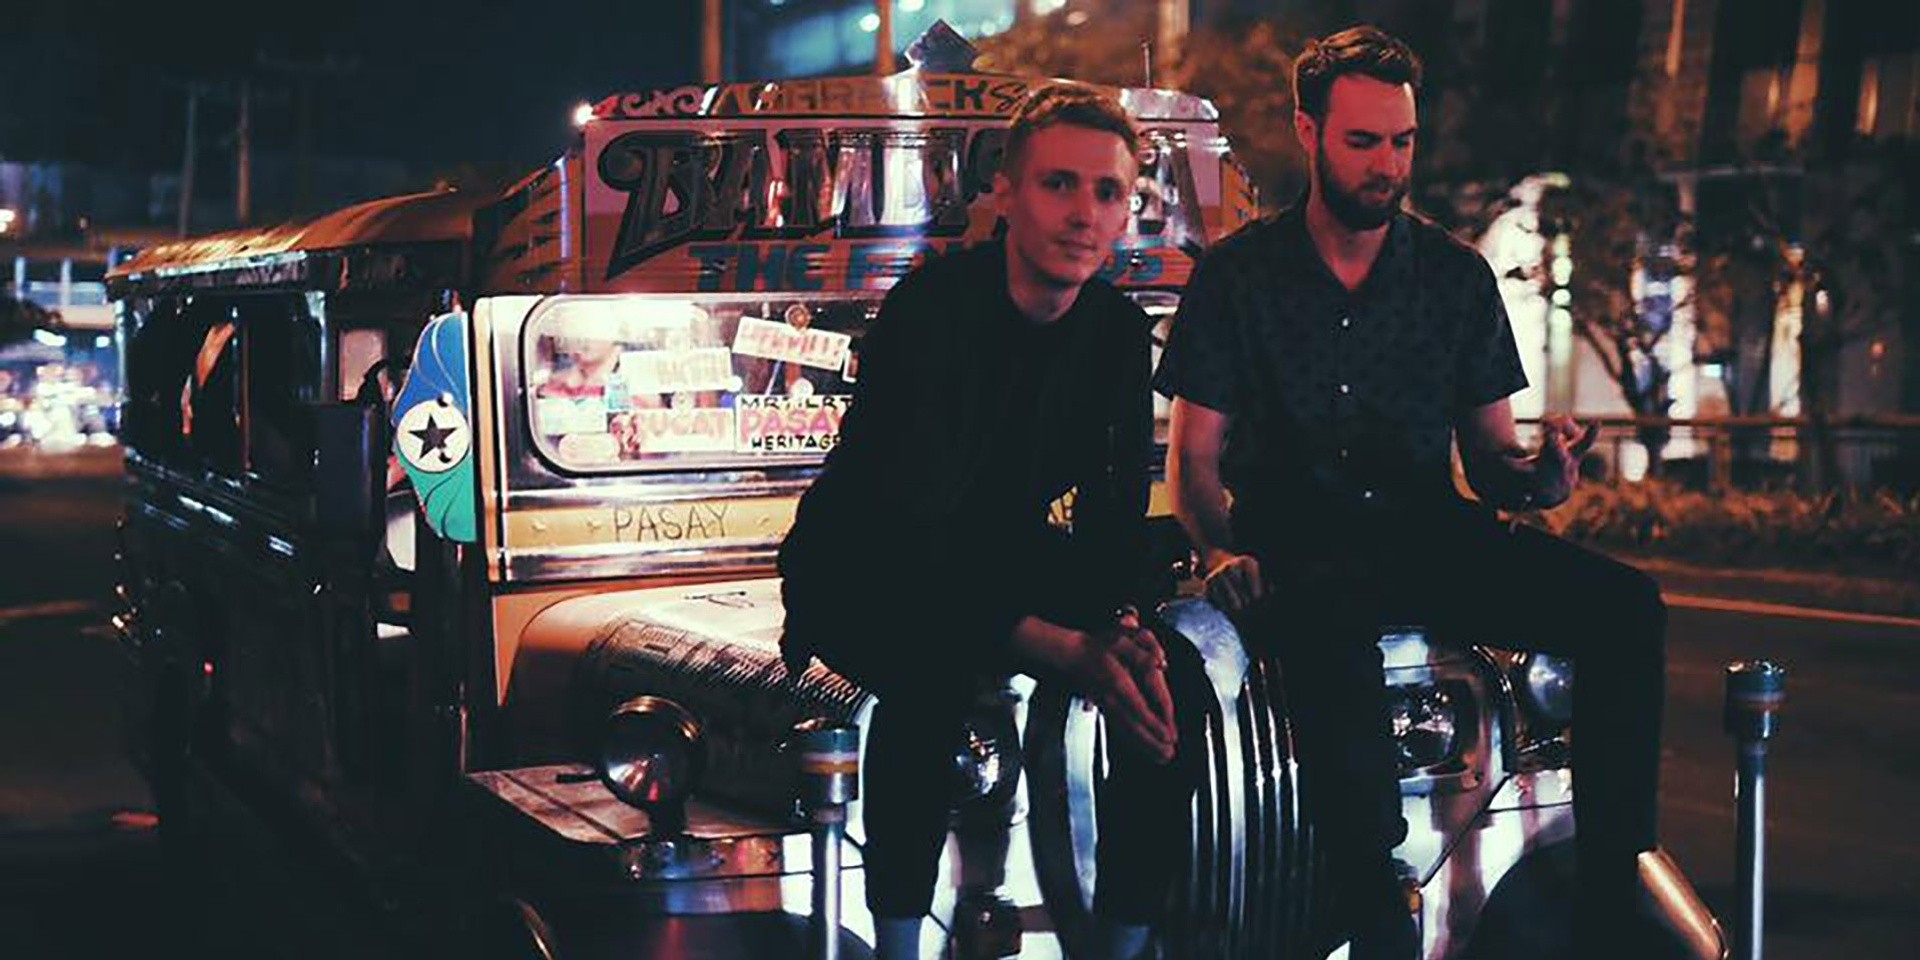 Honne to perform in Manila this July